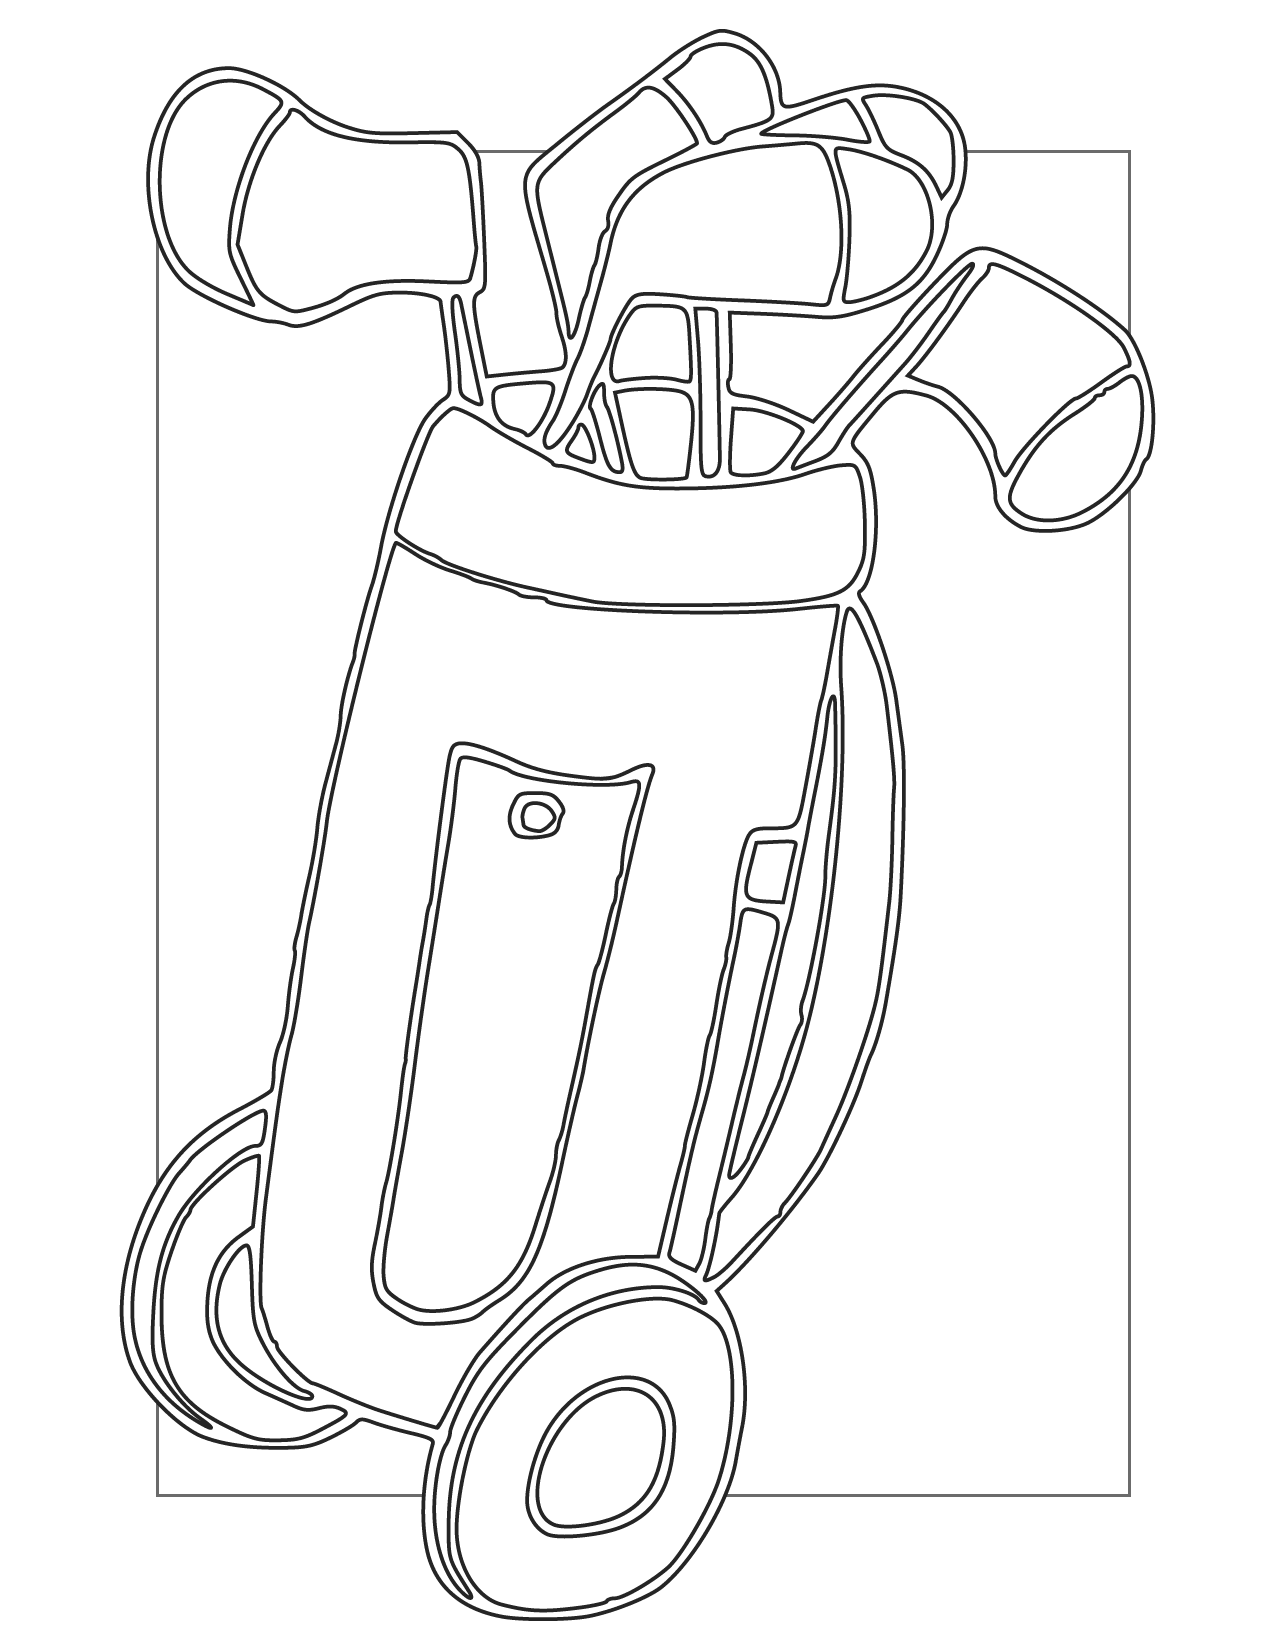 Golf Clubs Coloring Page